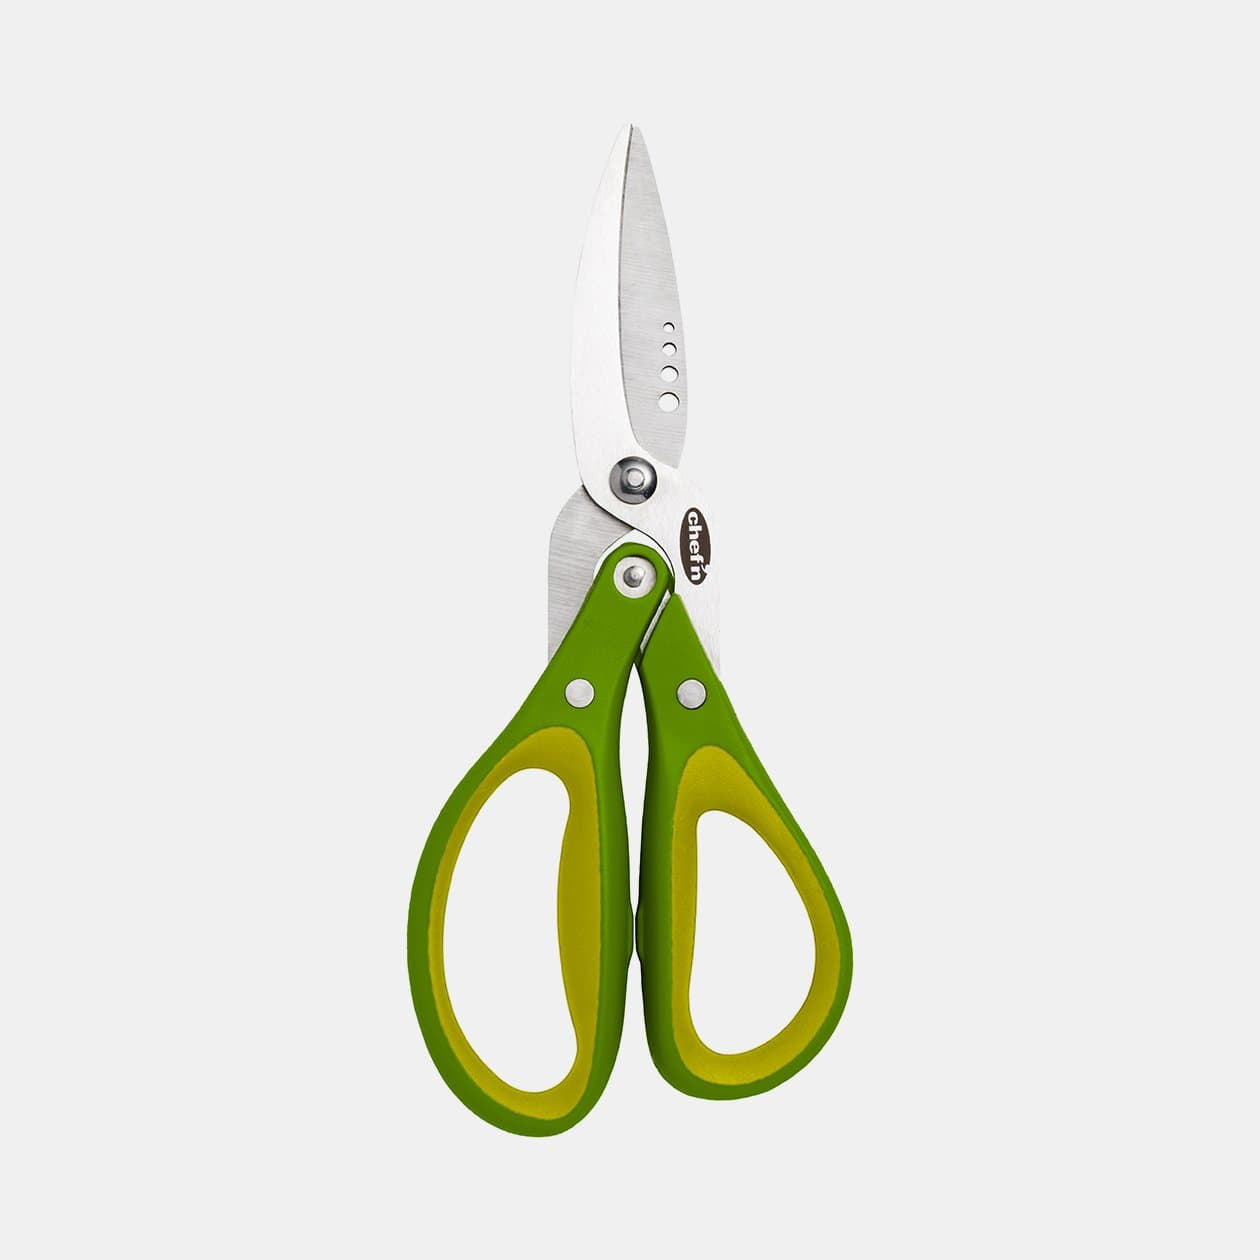 New AVANTI Dura Edge Herb Dicing Scissors Shears with Cleaning Comb Free  Post